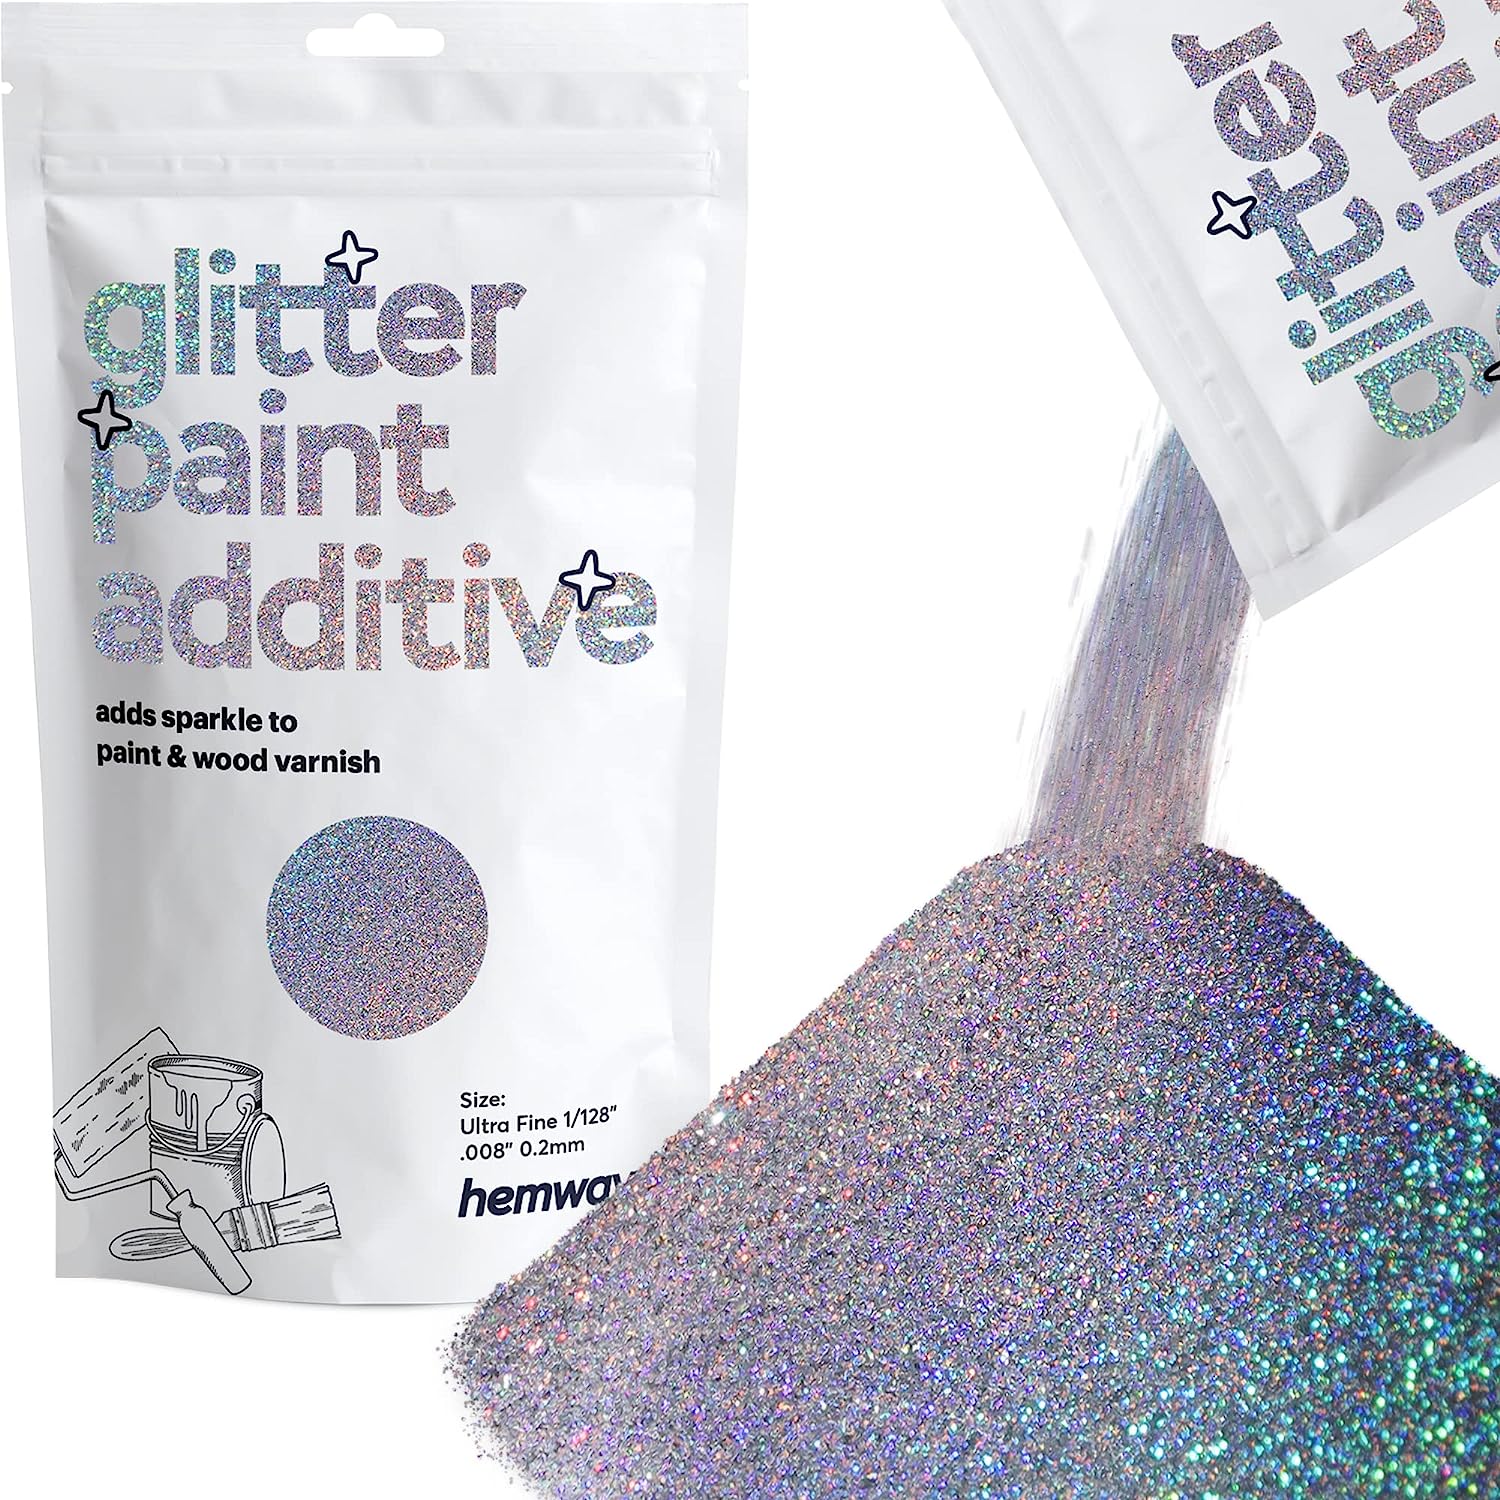 Hemway Glitter Paint Additive Glitter Crystals for [...]